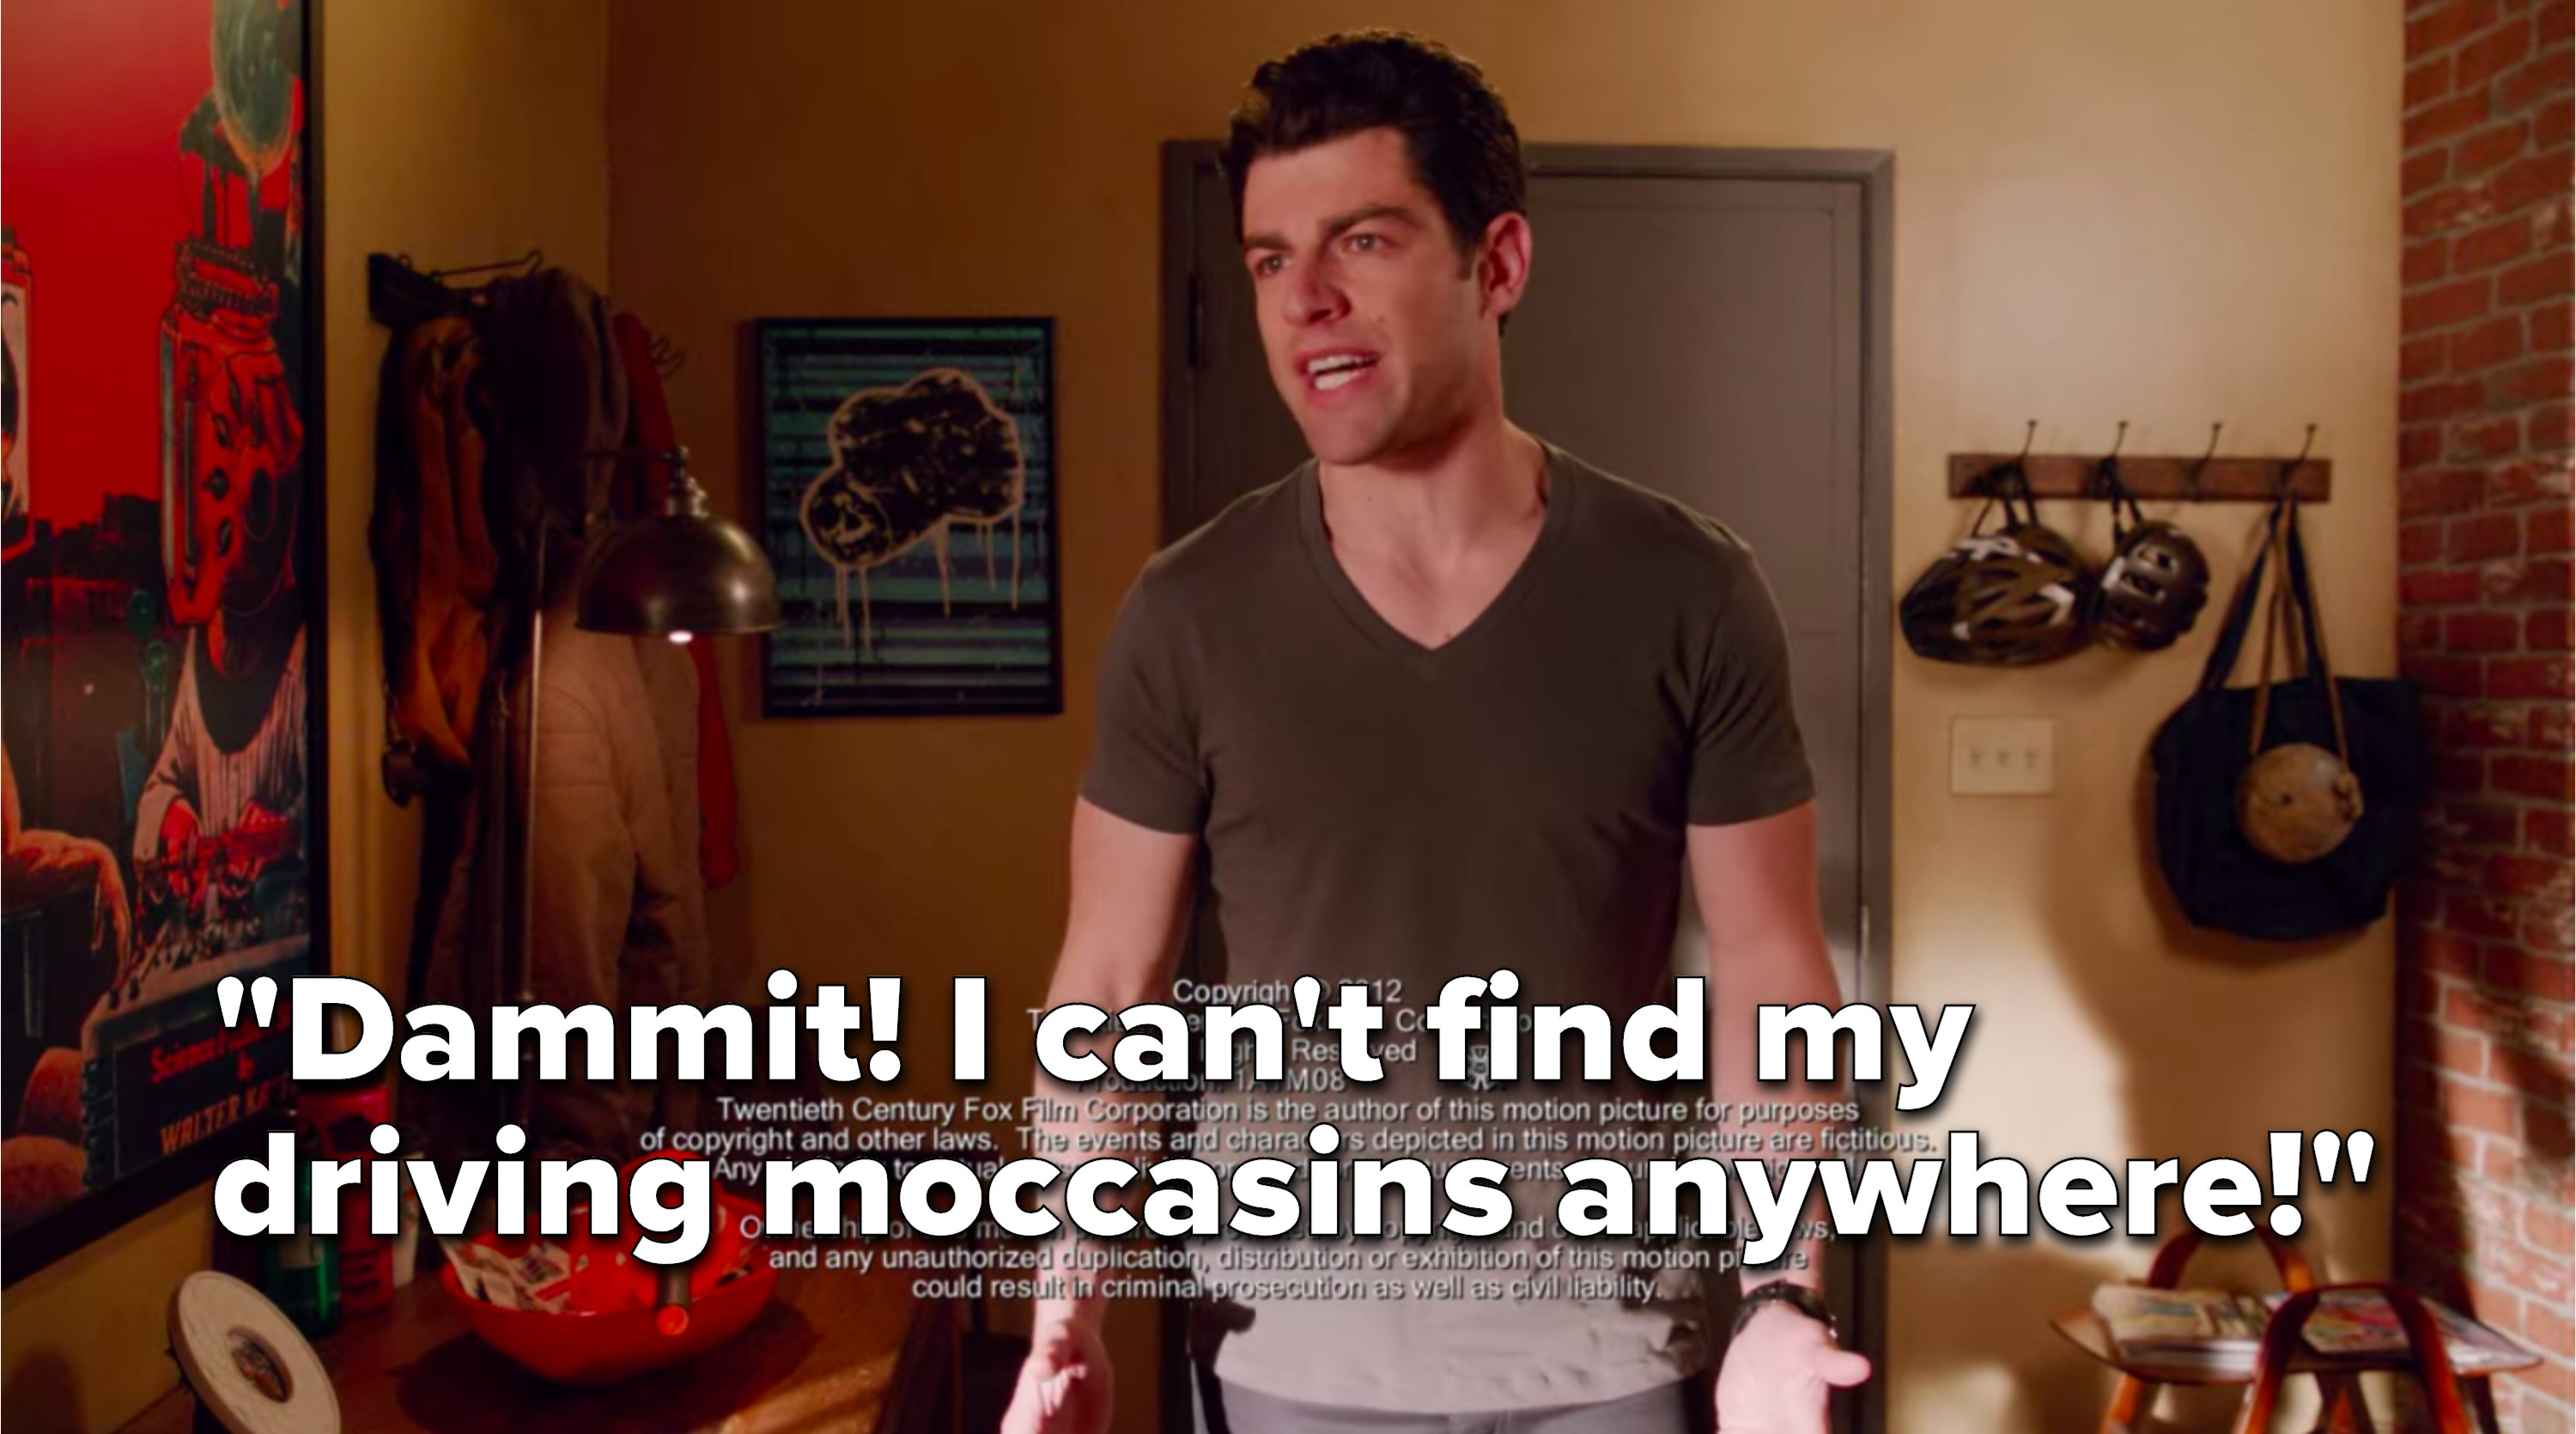 Schmidt says, &quot;Dammit, I can&#x27;t find my driving moccasins anywhere&quot;